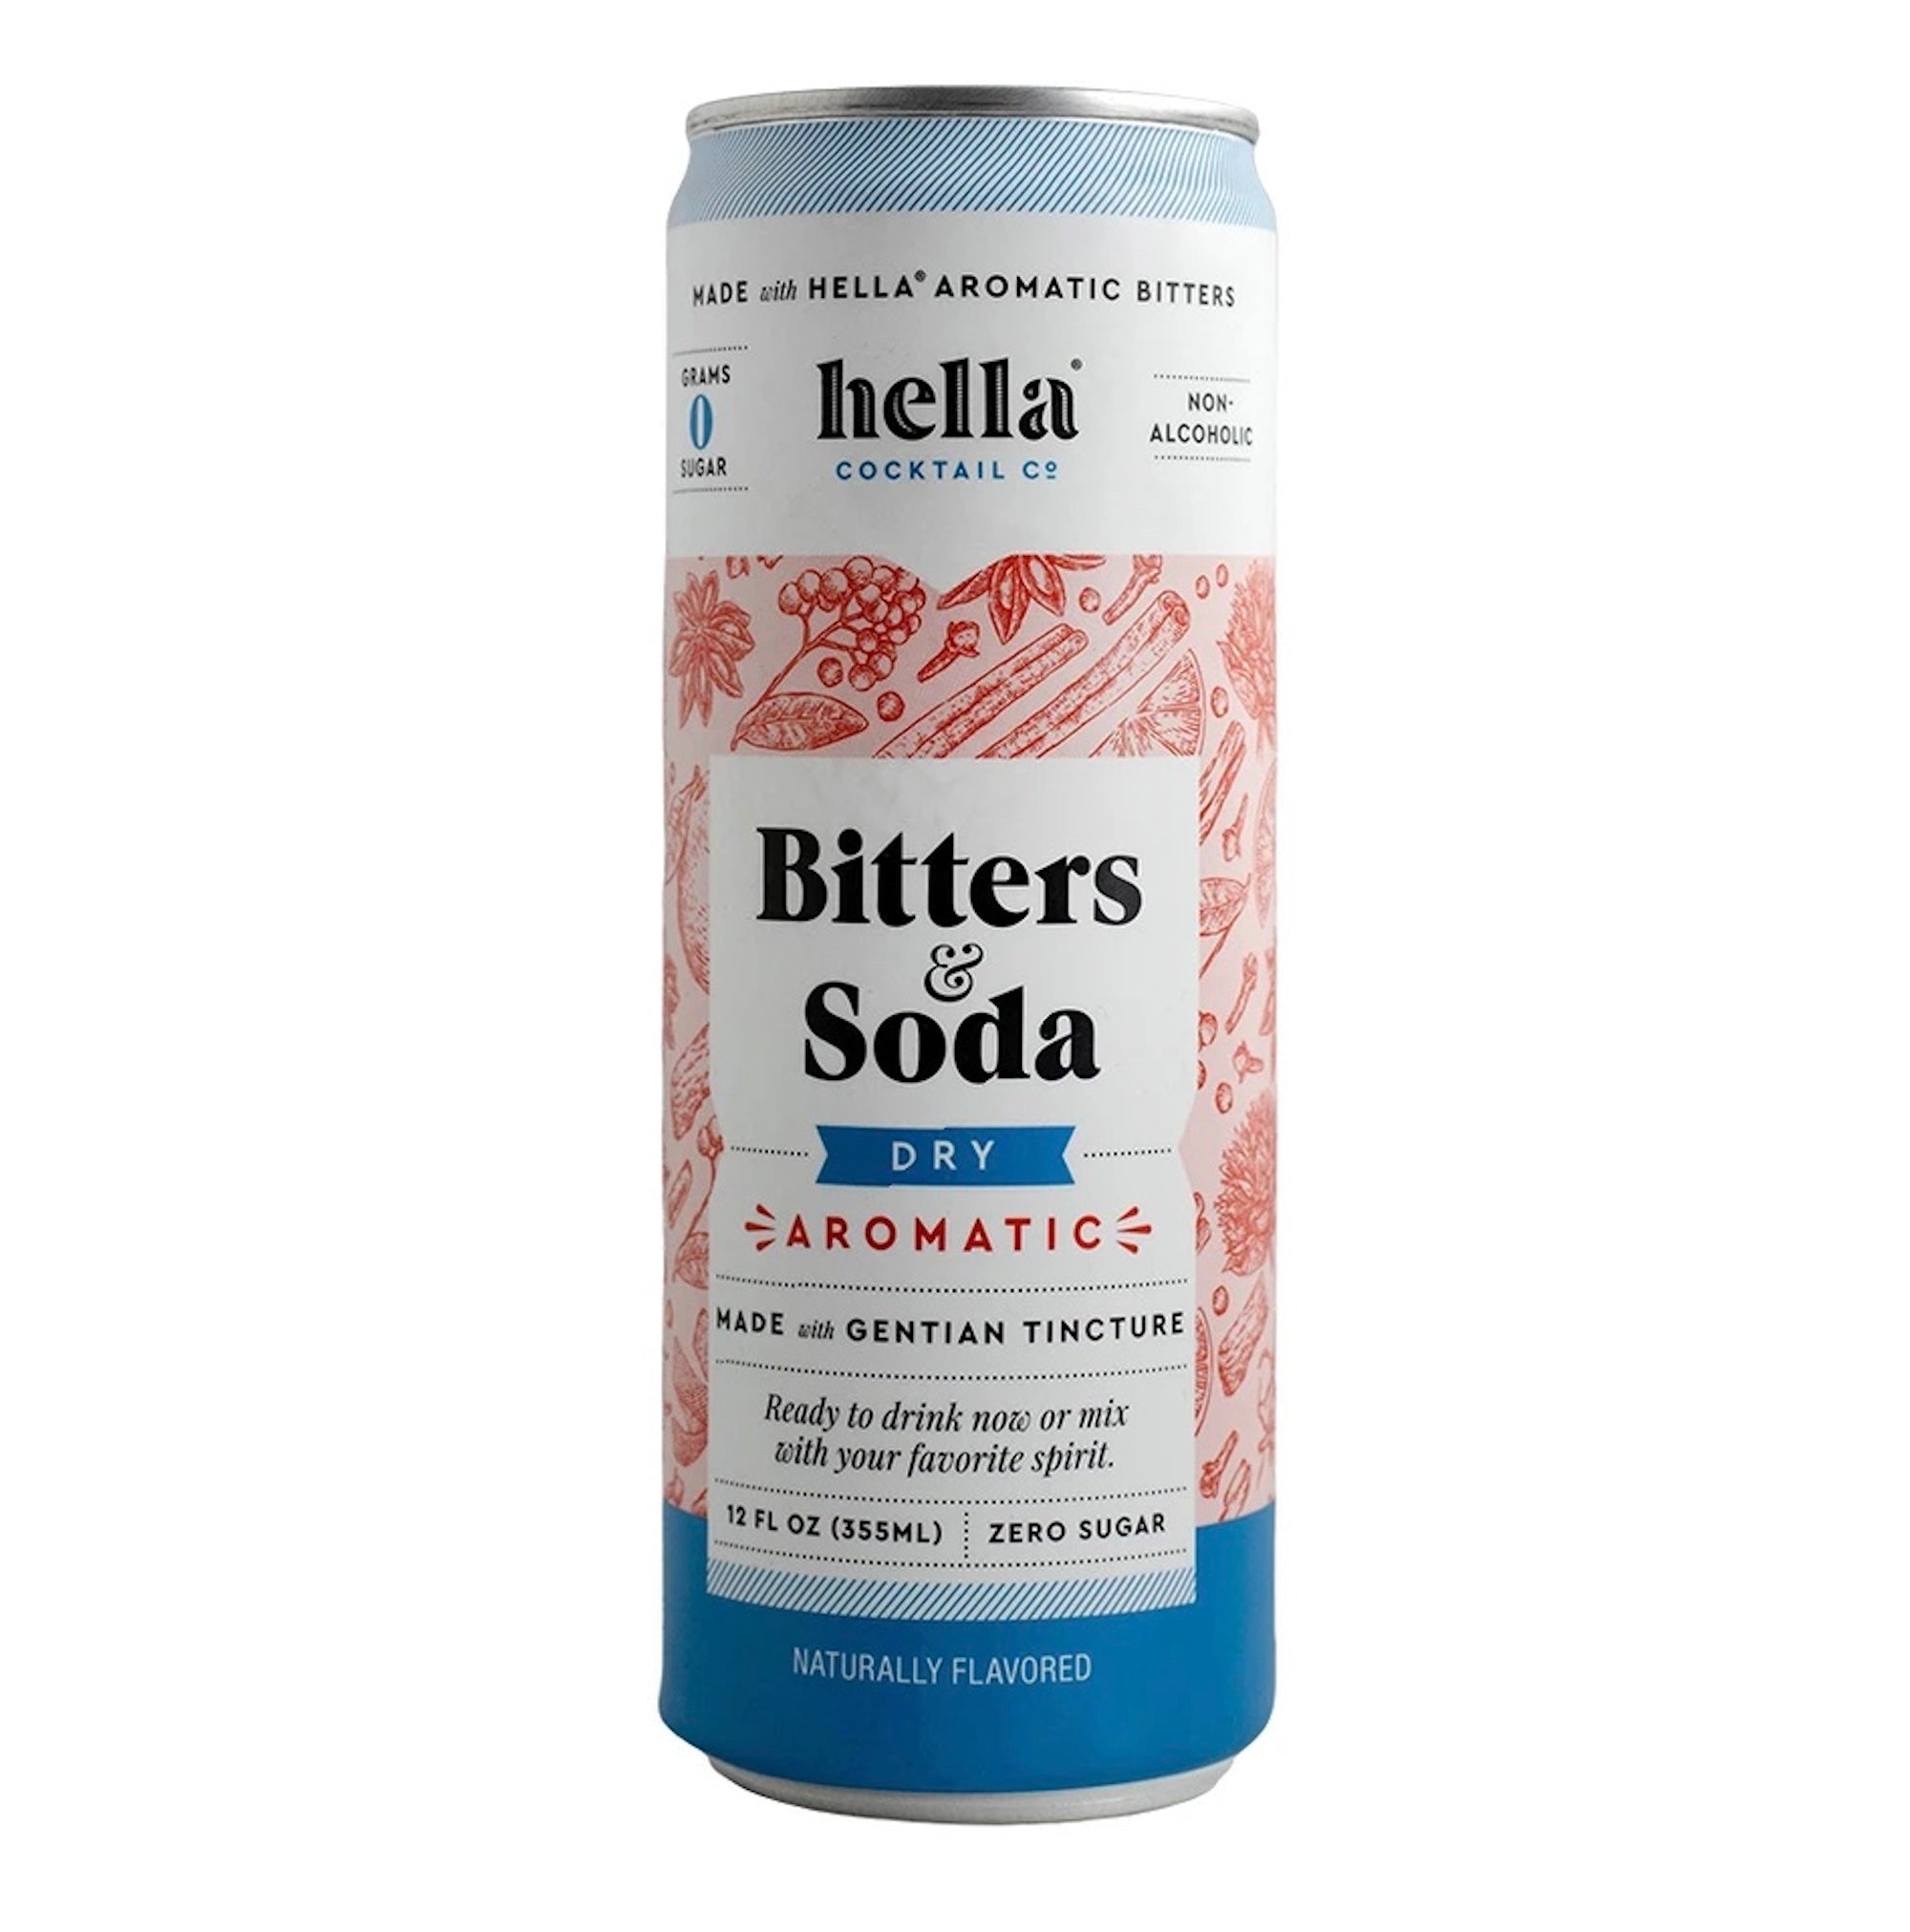 Hella Bitters & Soda Dry Aromatic 4 pack Cans